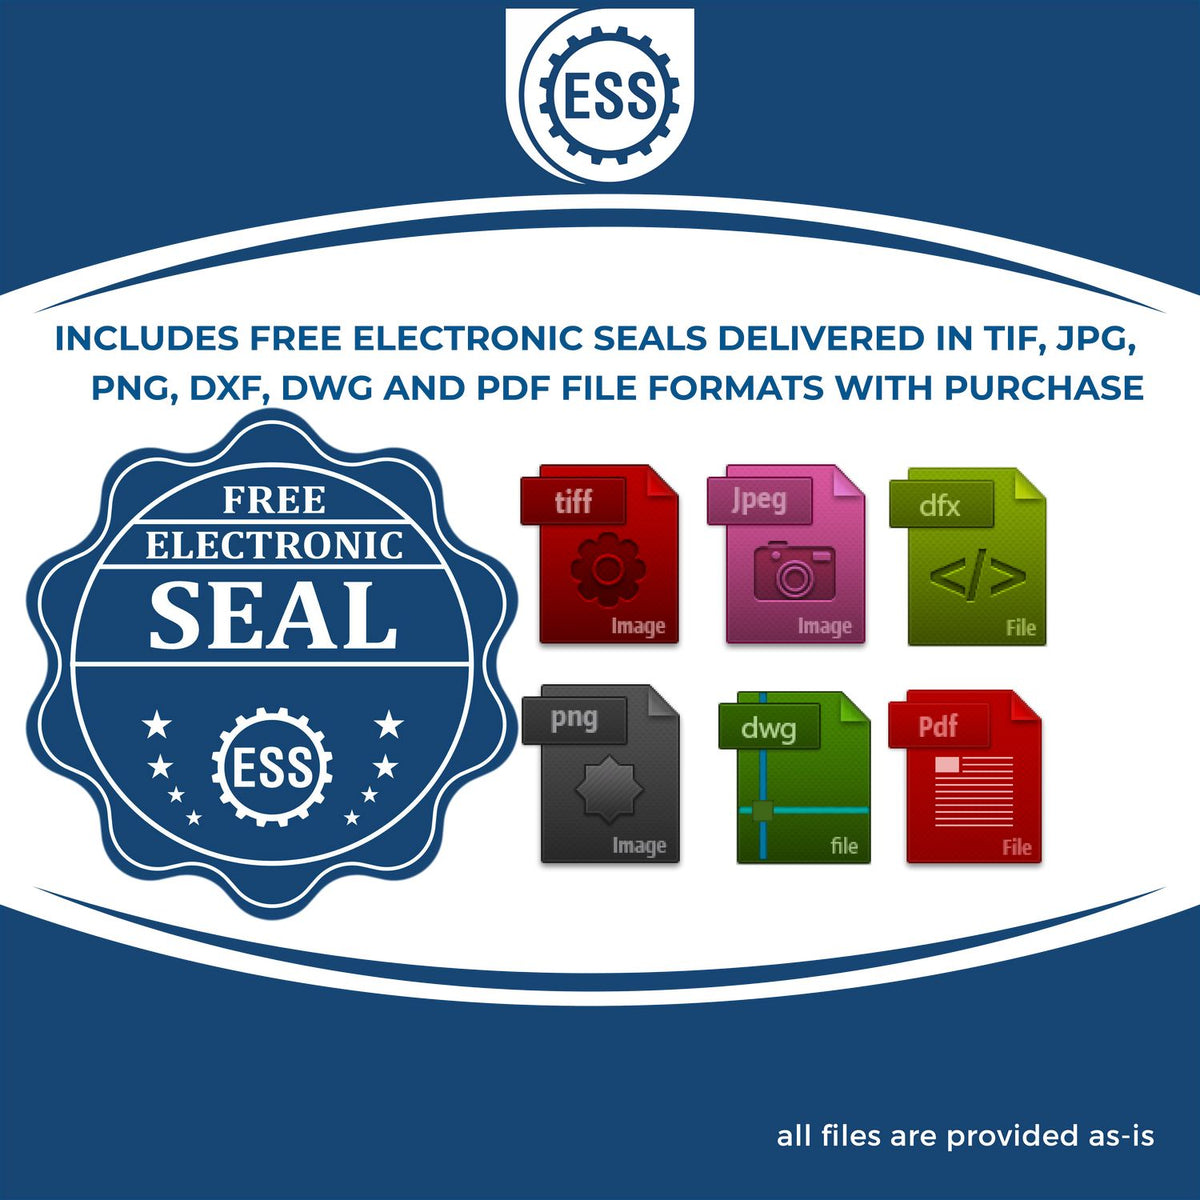 An infographic for the free electronic seal for the MaxLight Premium Pre-Inked Maine State Seal Notarial Stamp illustrating the different file type icons such as DXF, DWG, TIF, JPG and PNG.